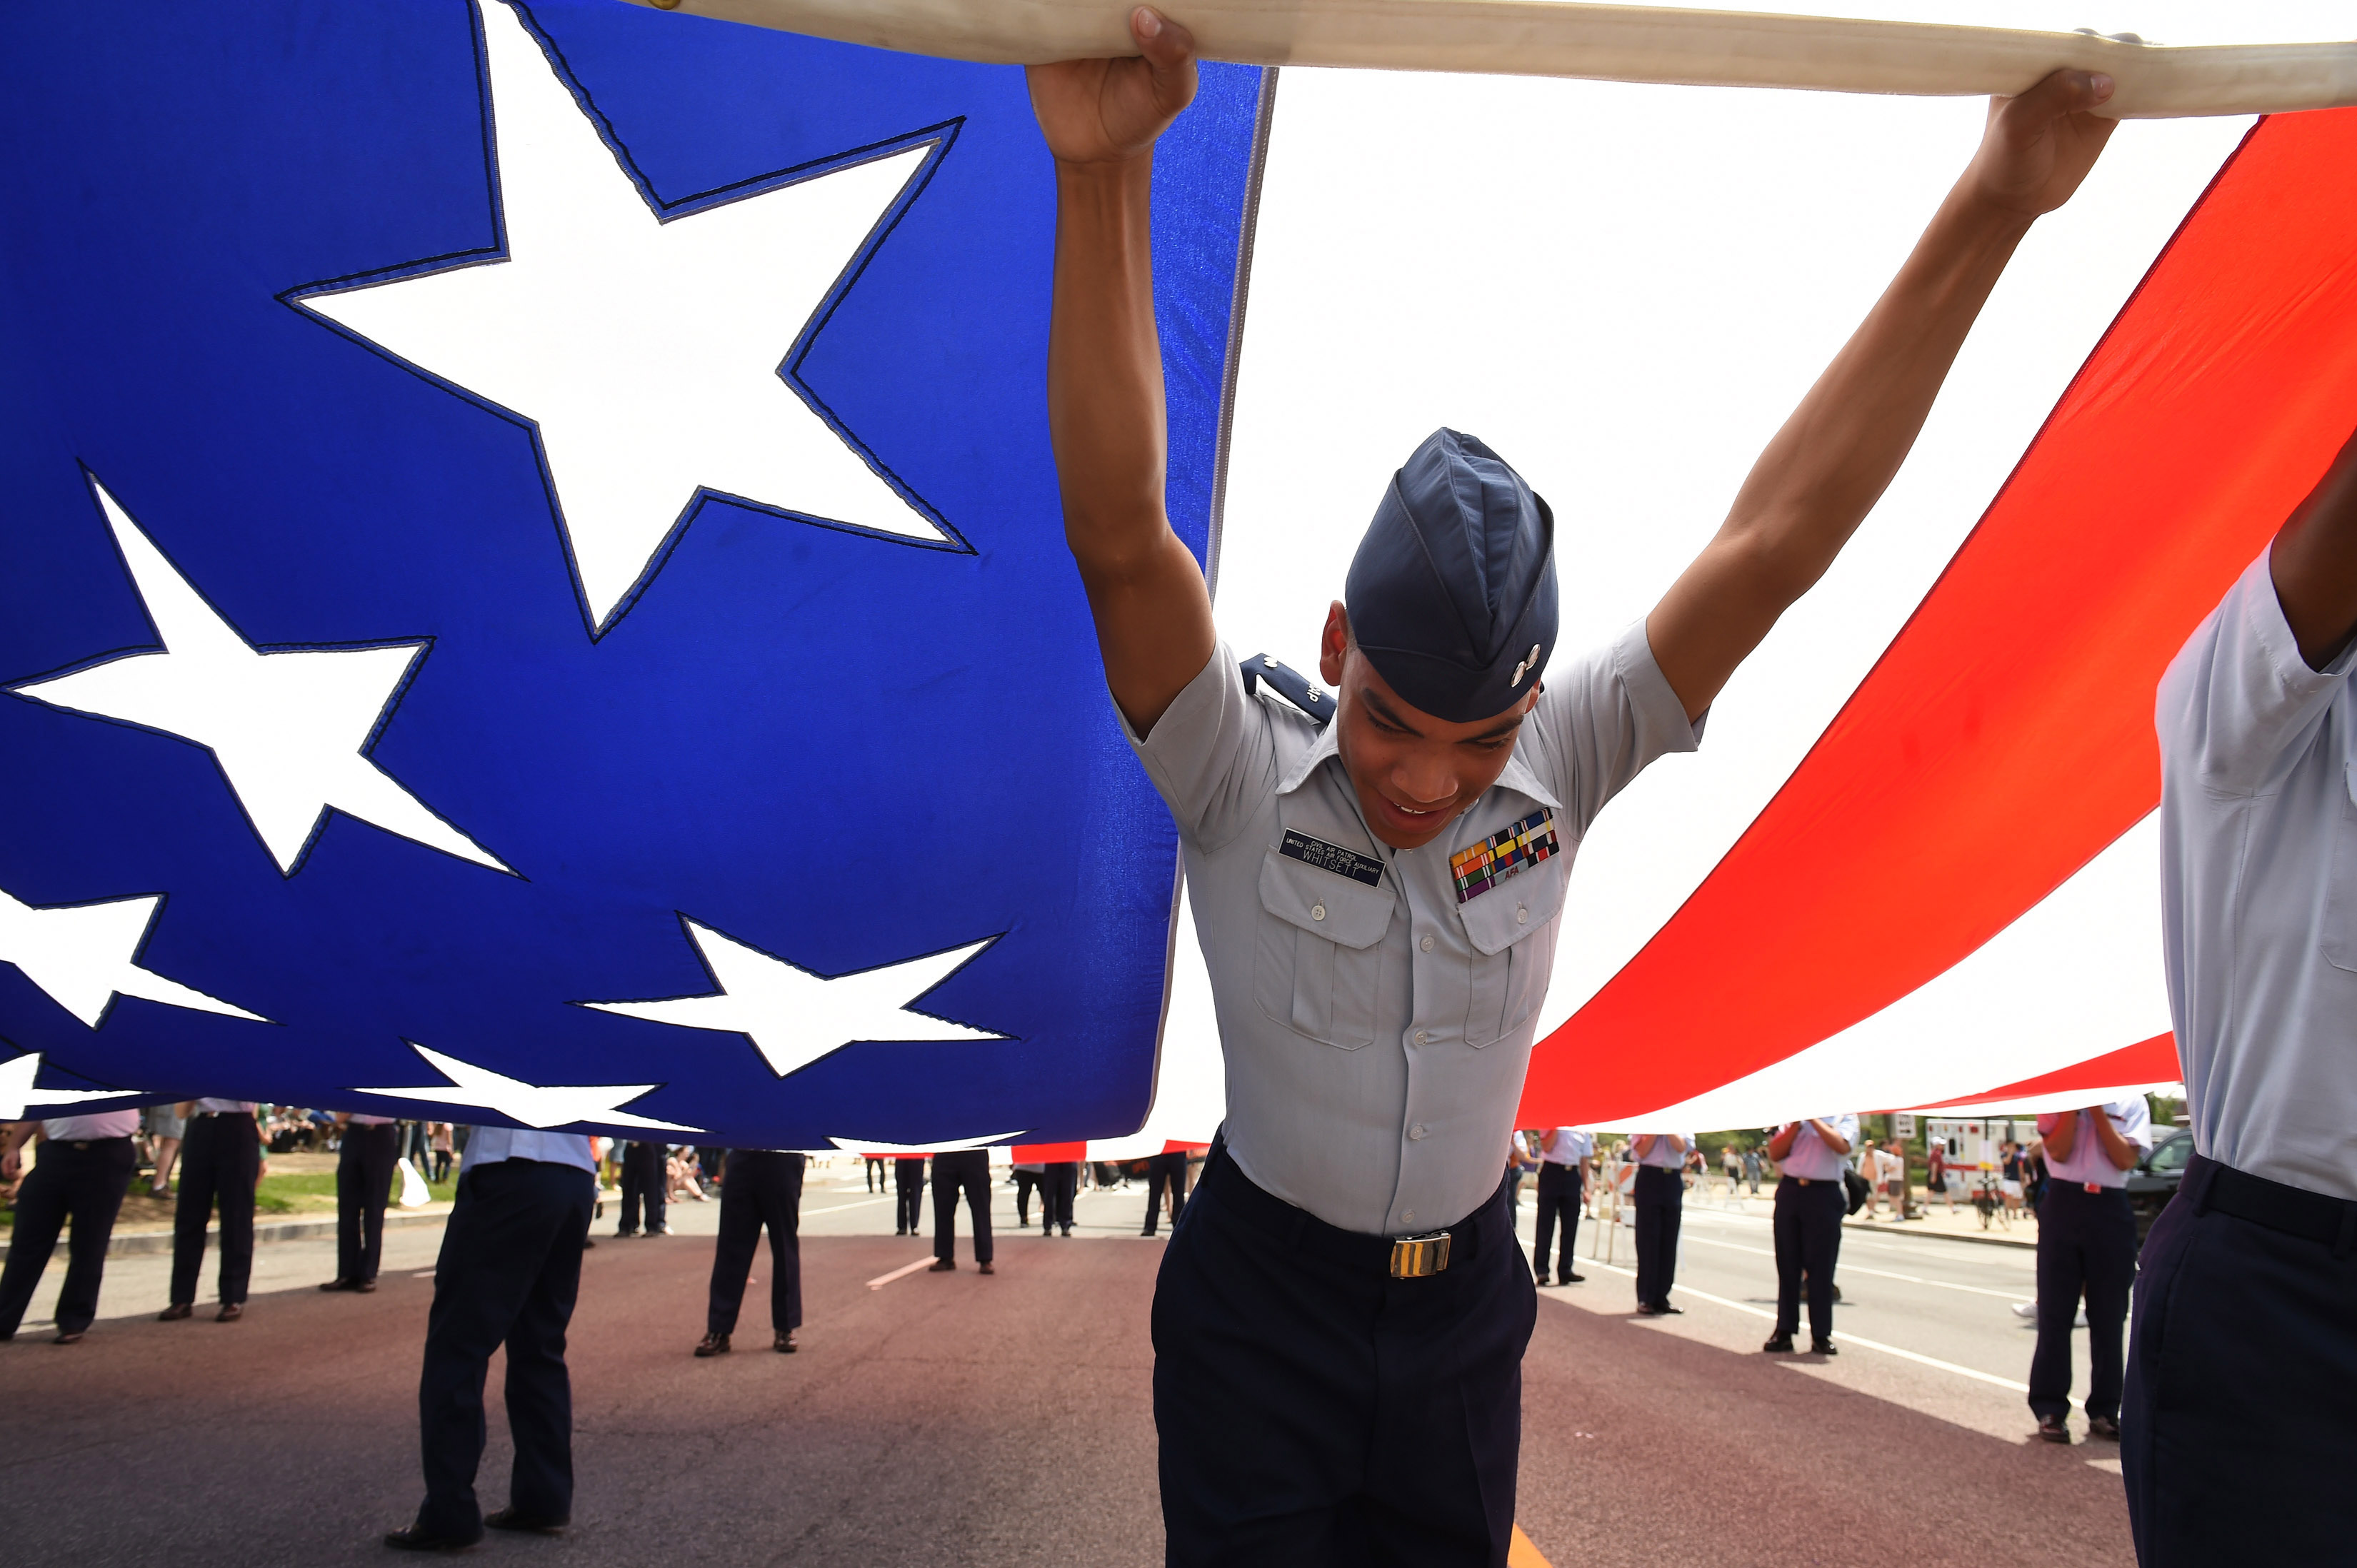 Tyler Whitsett, a First Lieutenant cadet with the Civil Air Patrol United States Air Force Auxiliary helps to hold up a large American flag prior to the start of the National Memorial Day Parade on May 25, 2015 in Washington, DC. (Matt McClain—The Washington Post/Getty Images)